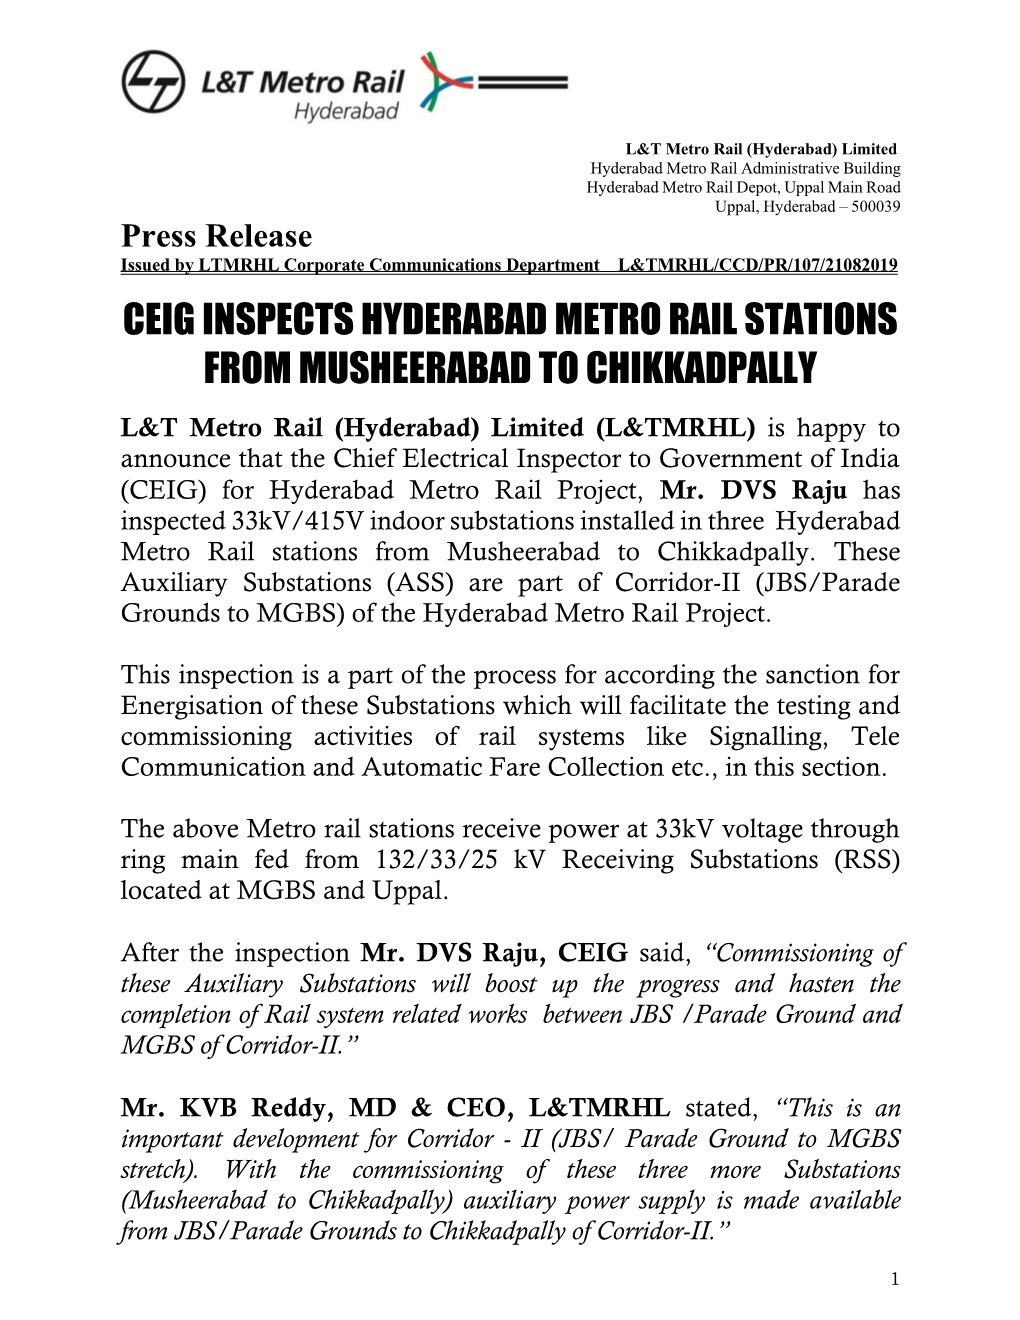 2019-08-21 CEIG Inspects Hyderabad Metro Rail Stations from Musheerabad to Chikkadpally